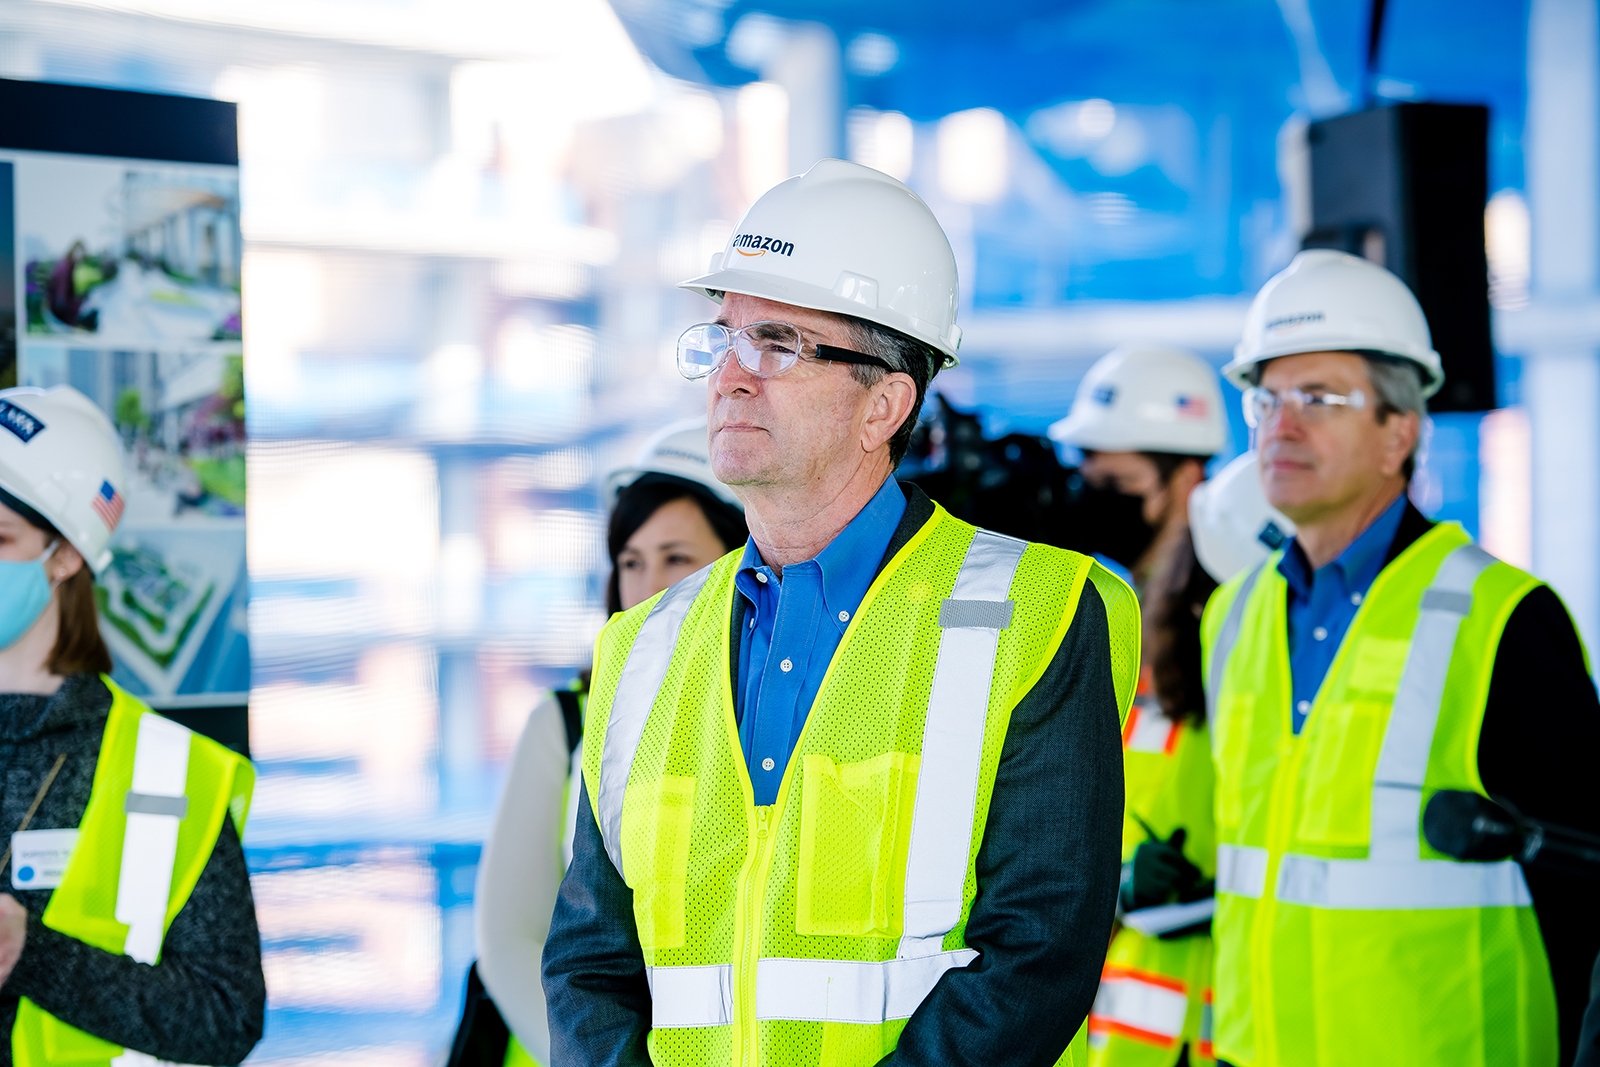 An image of a man wearing a hard hat that says "Amazon" and a yellow safety vest looking and listening to someone off camera while standing at a construction site. The man is accompanied by a group of people with similar safety gear on.